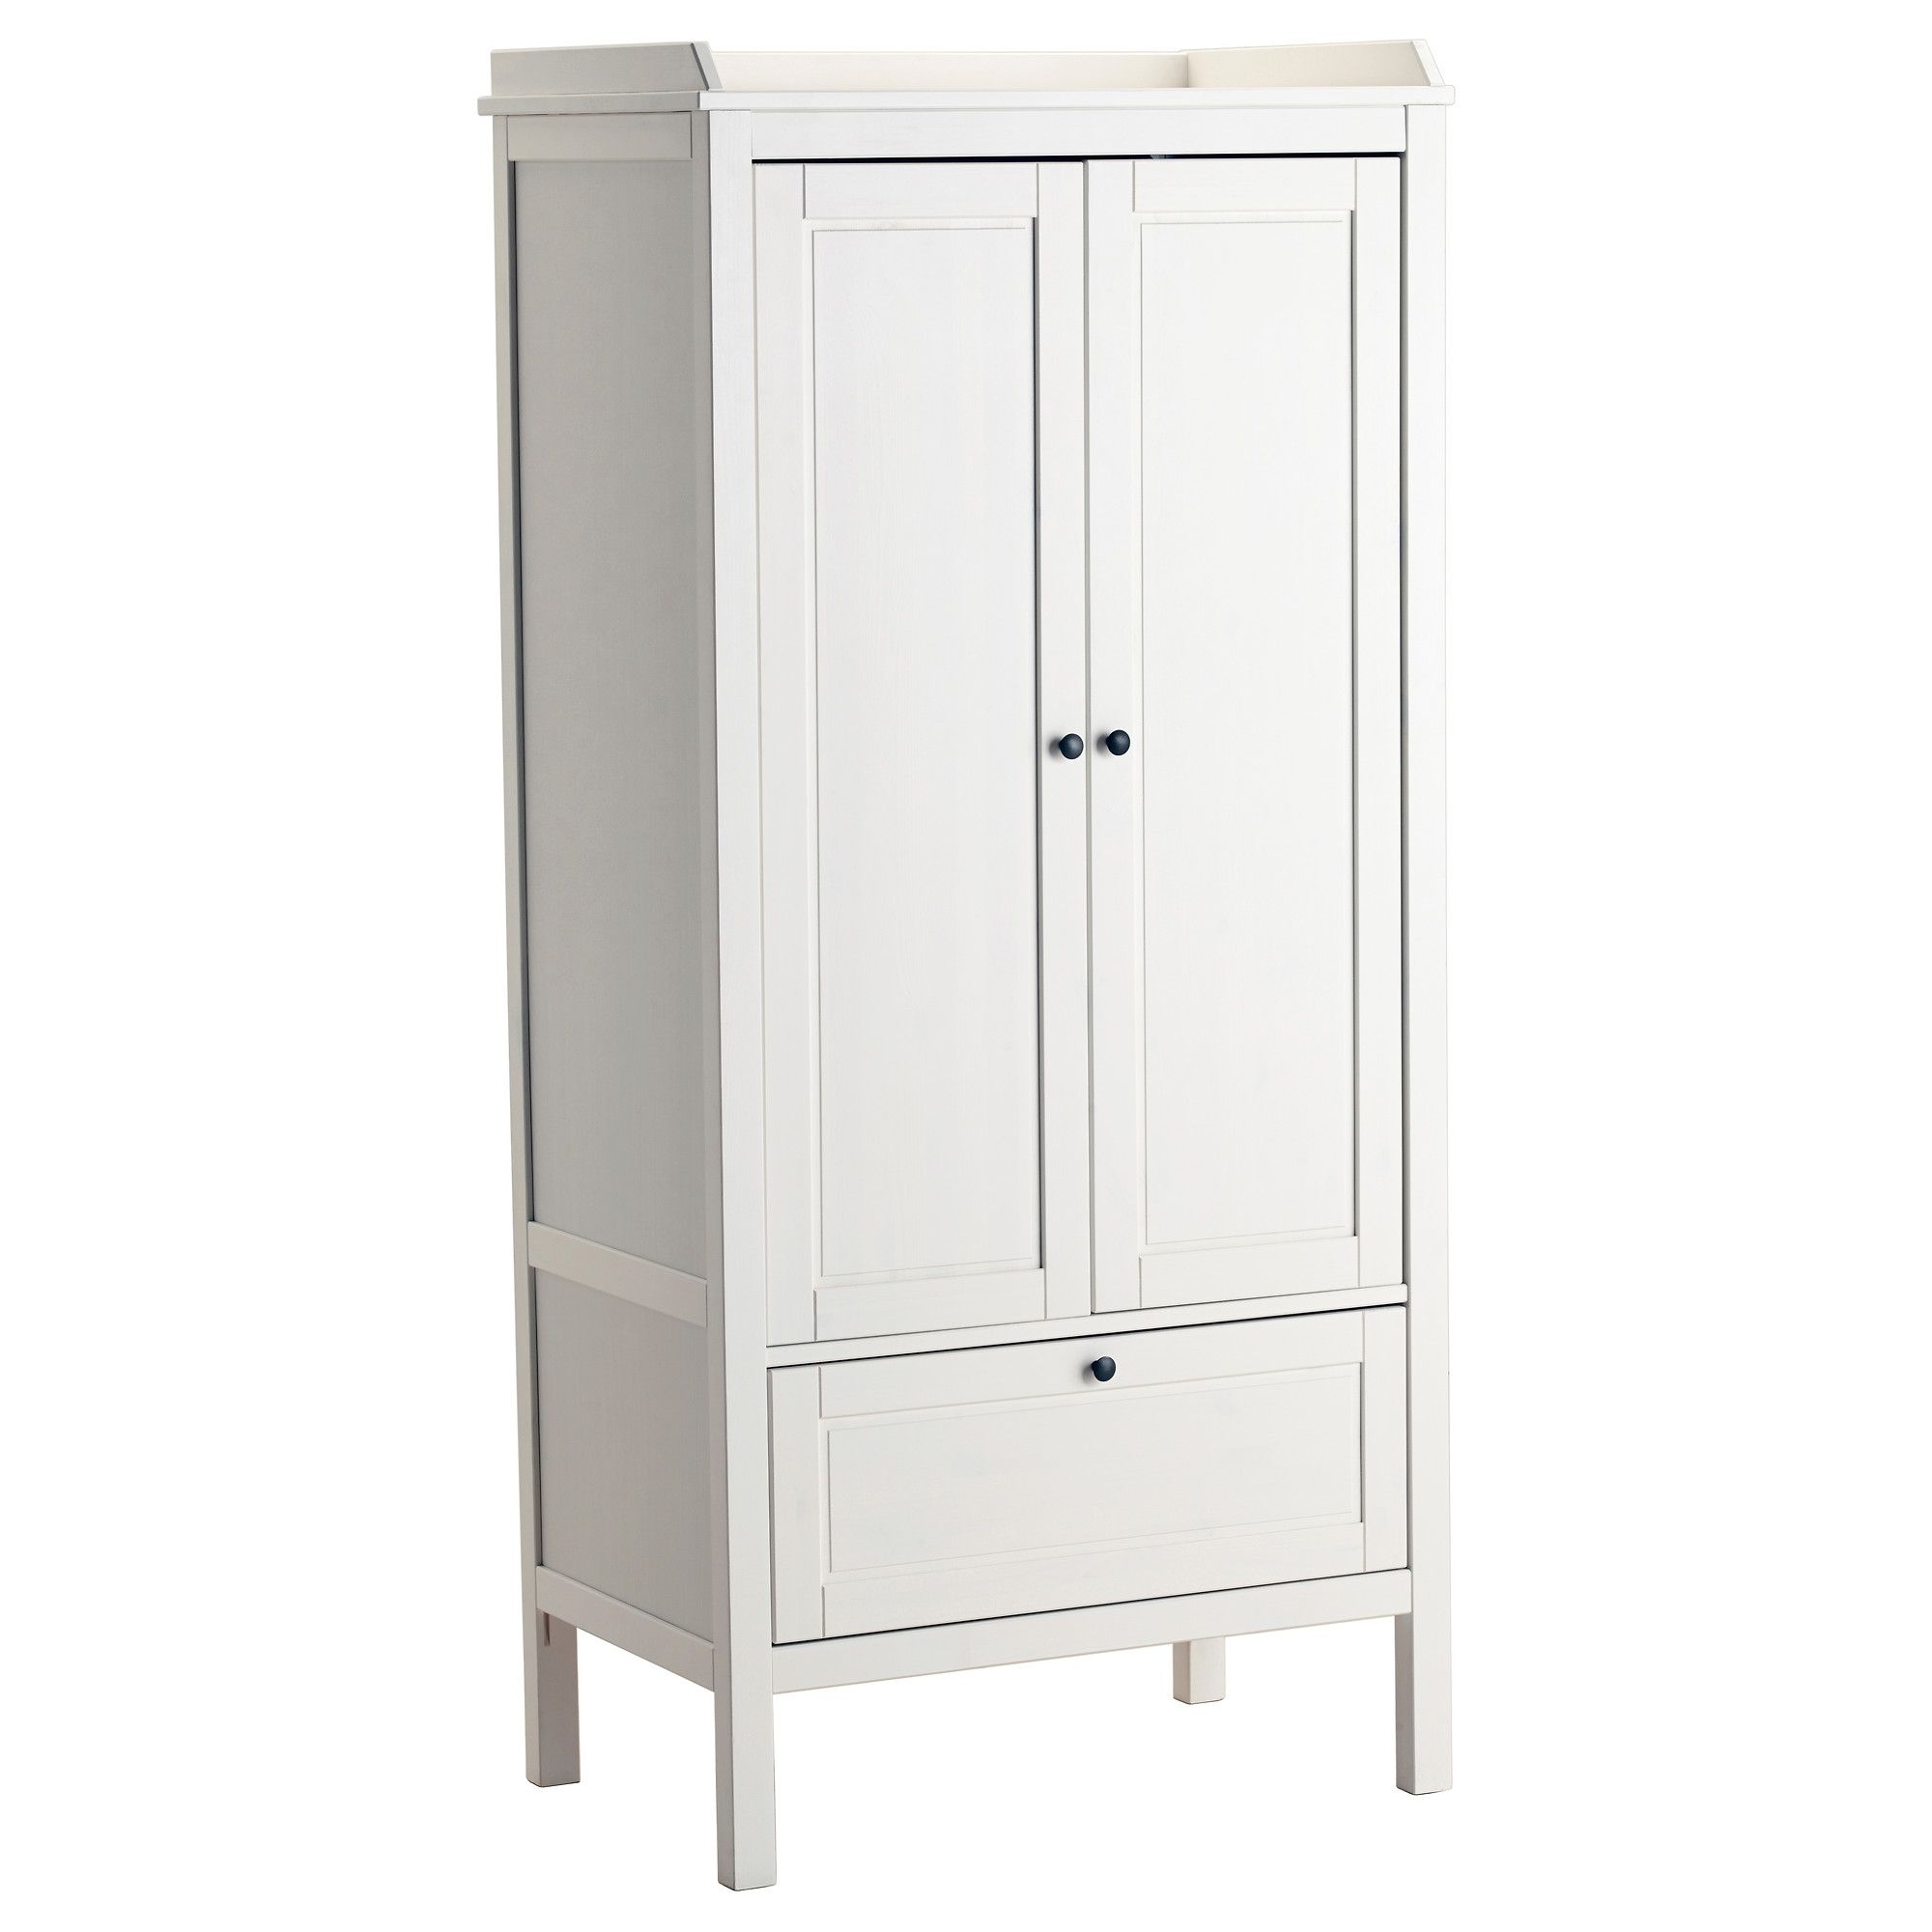 Single White Wardrobe With Drawers Argos And Shelves Canvas This With Most Popular Single White Wardrobes With Drawers (View 11 of 15)